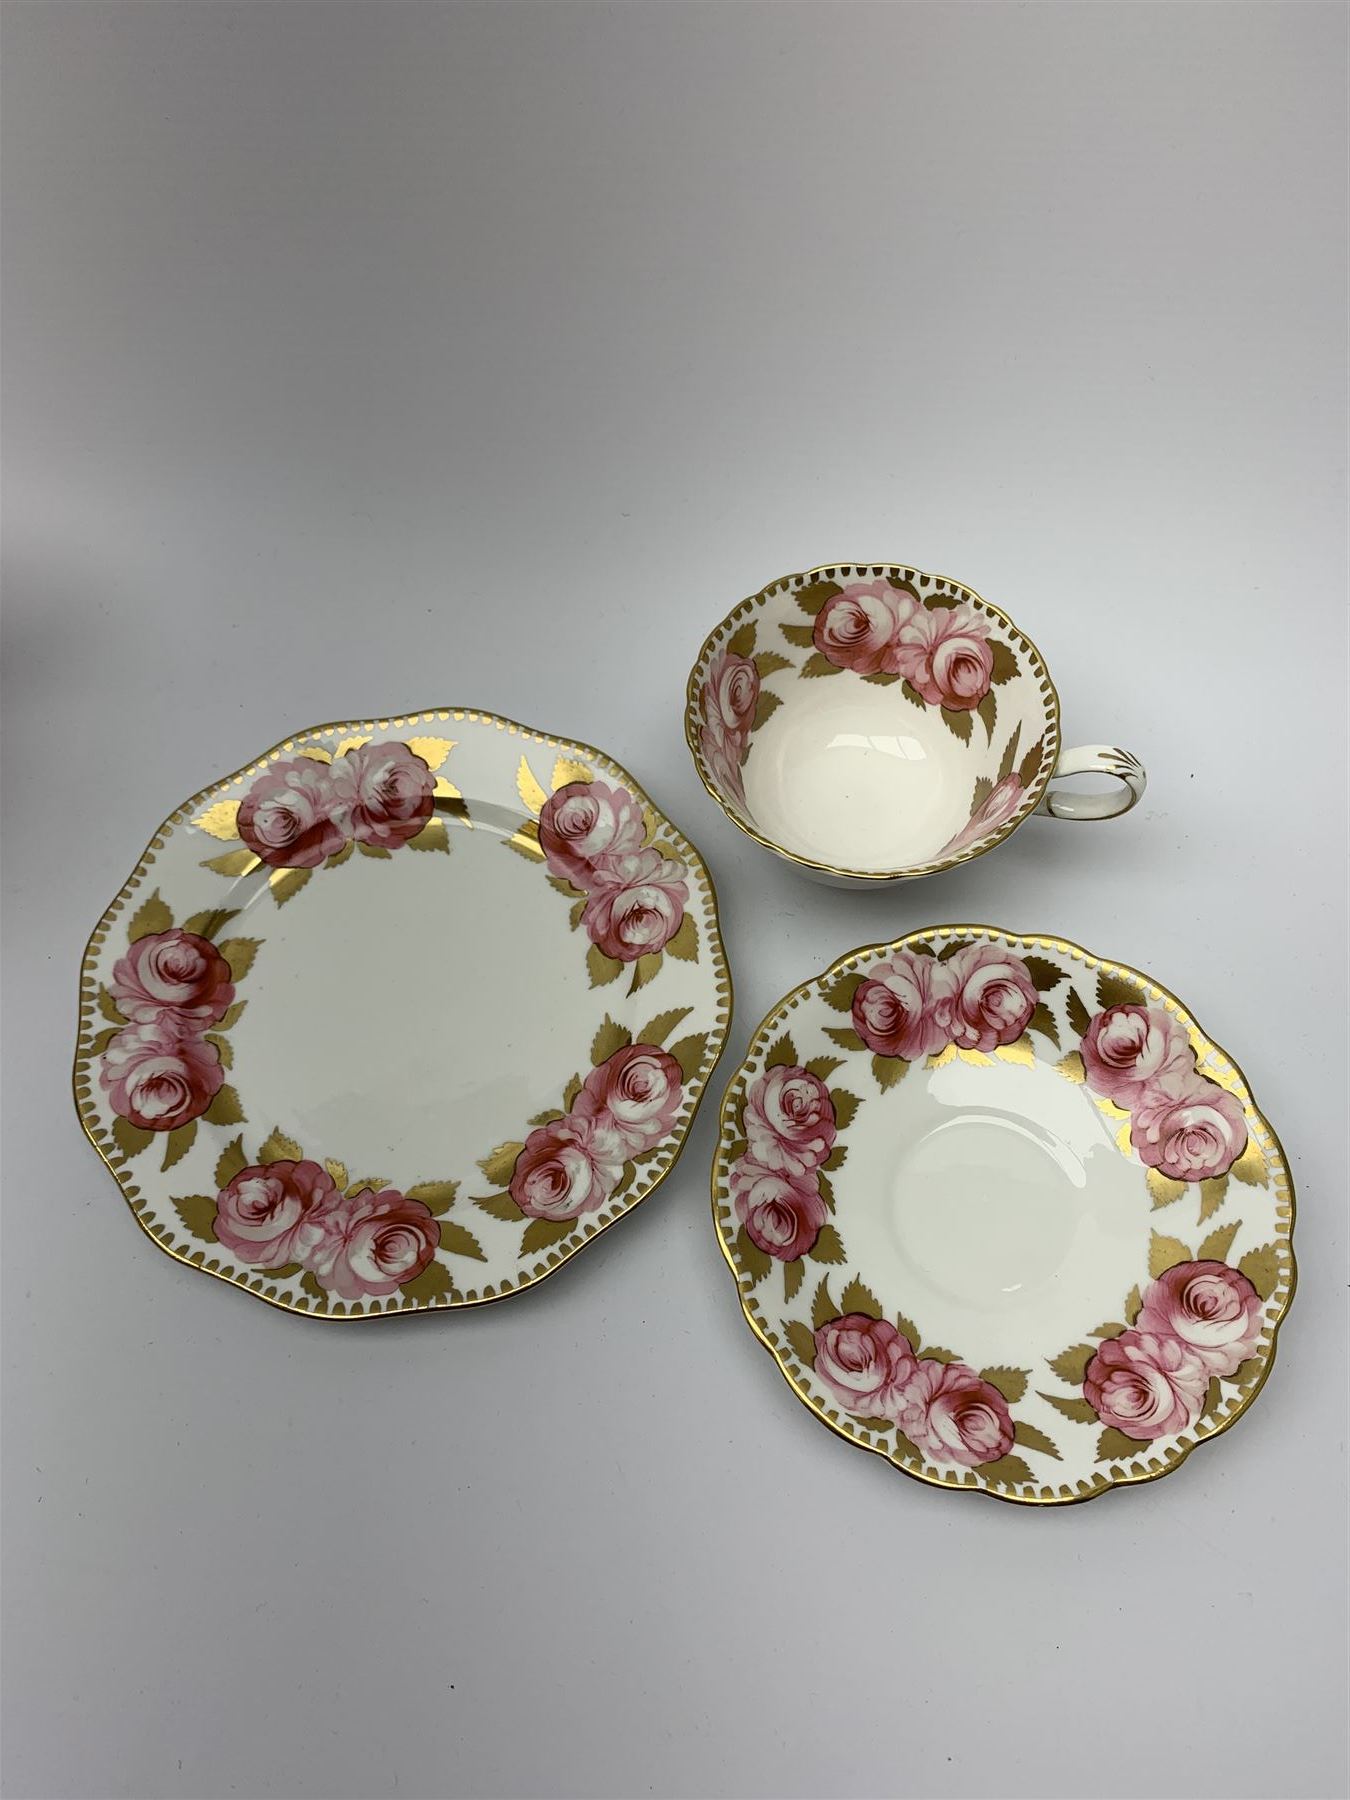 Early 19th century Daniel tea set for one - Image 4 of 9